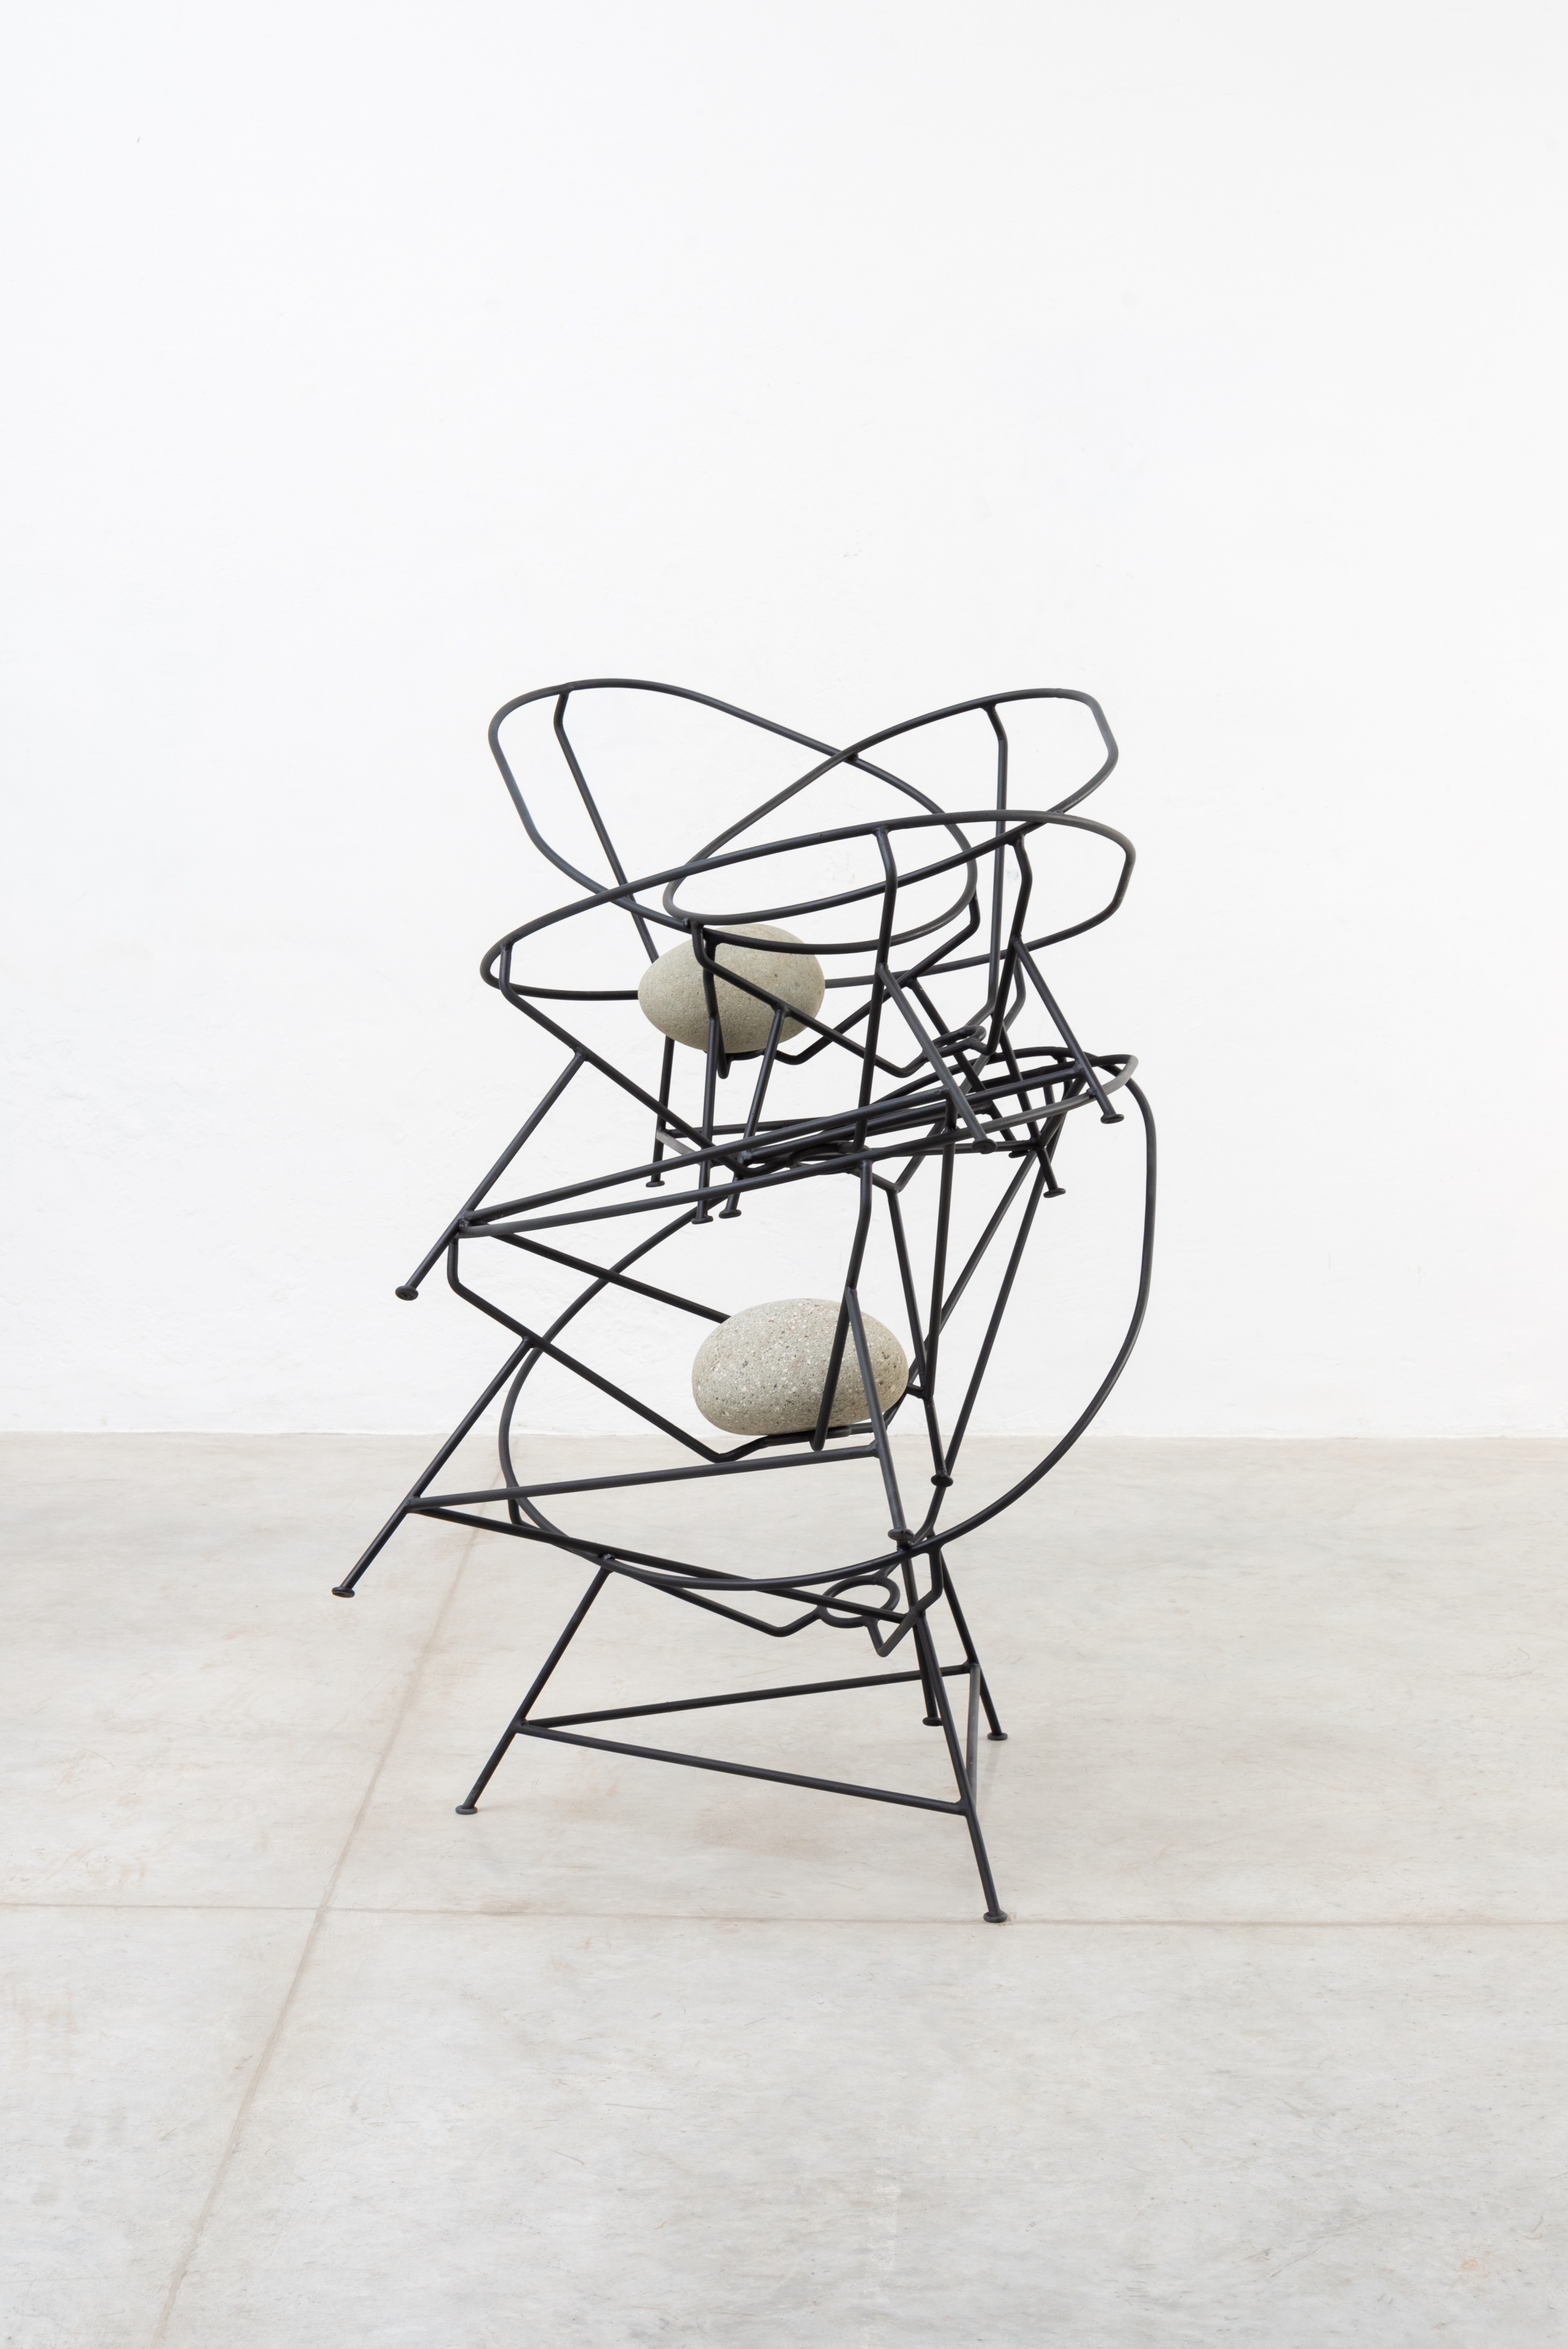 
Acapulco chair stack, 2021
metal, enamel paint and boulders
53 3/4 x 33 7/16 x 54 1/2 inches (136.5 x 85 x 138.5 cm), JDa-21.12
&nbsp;